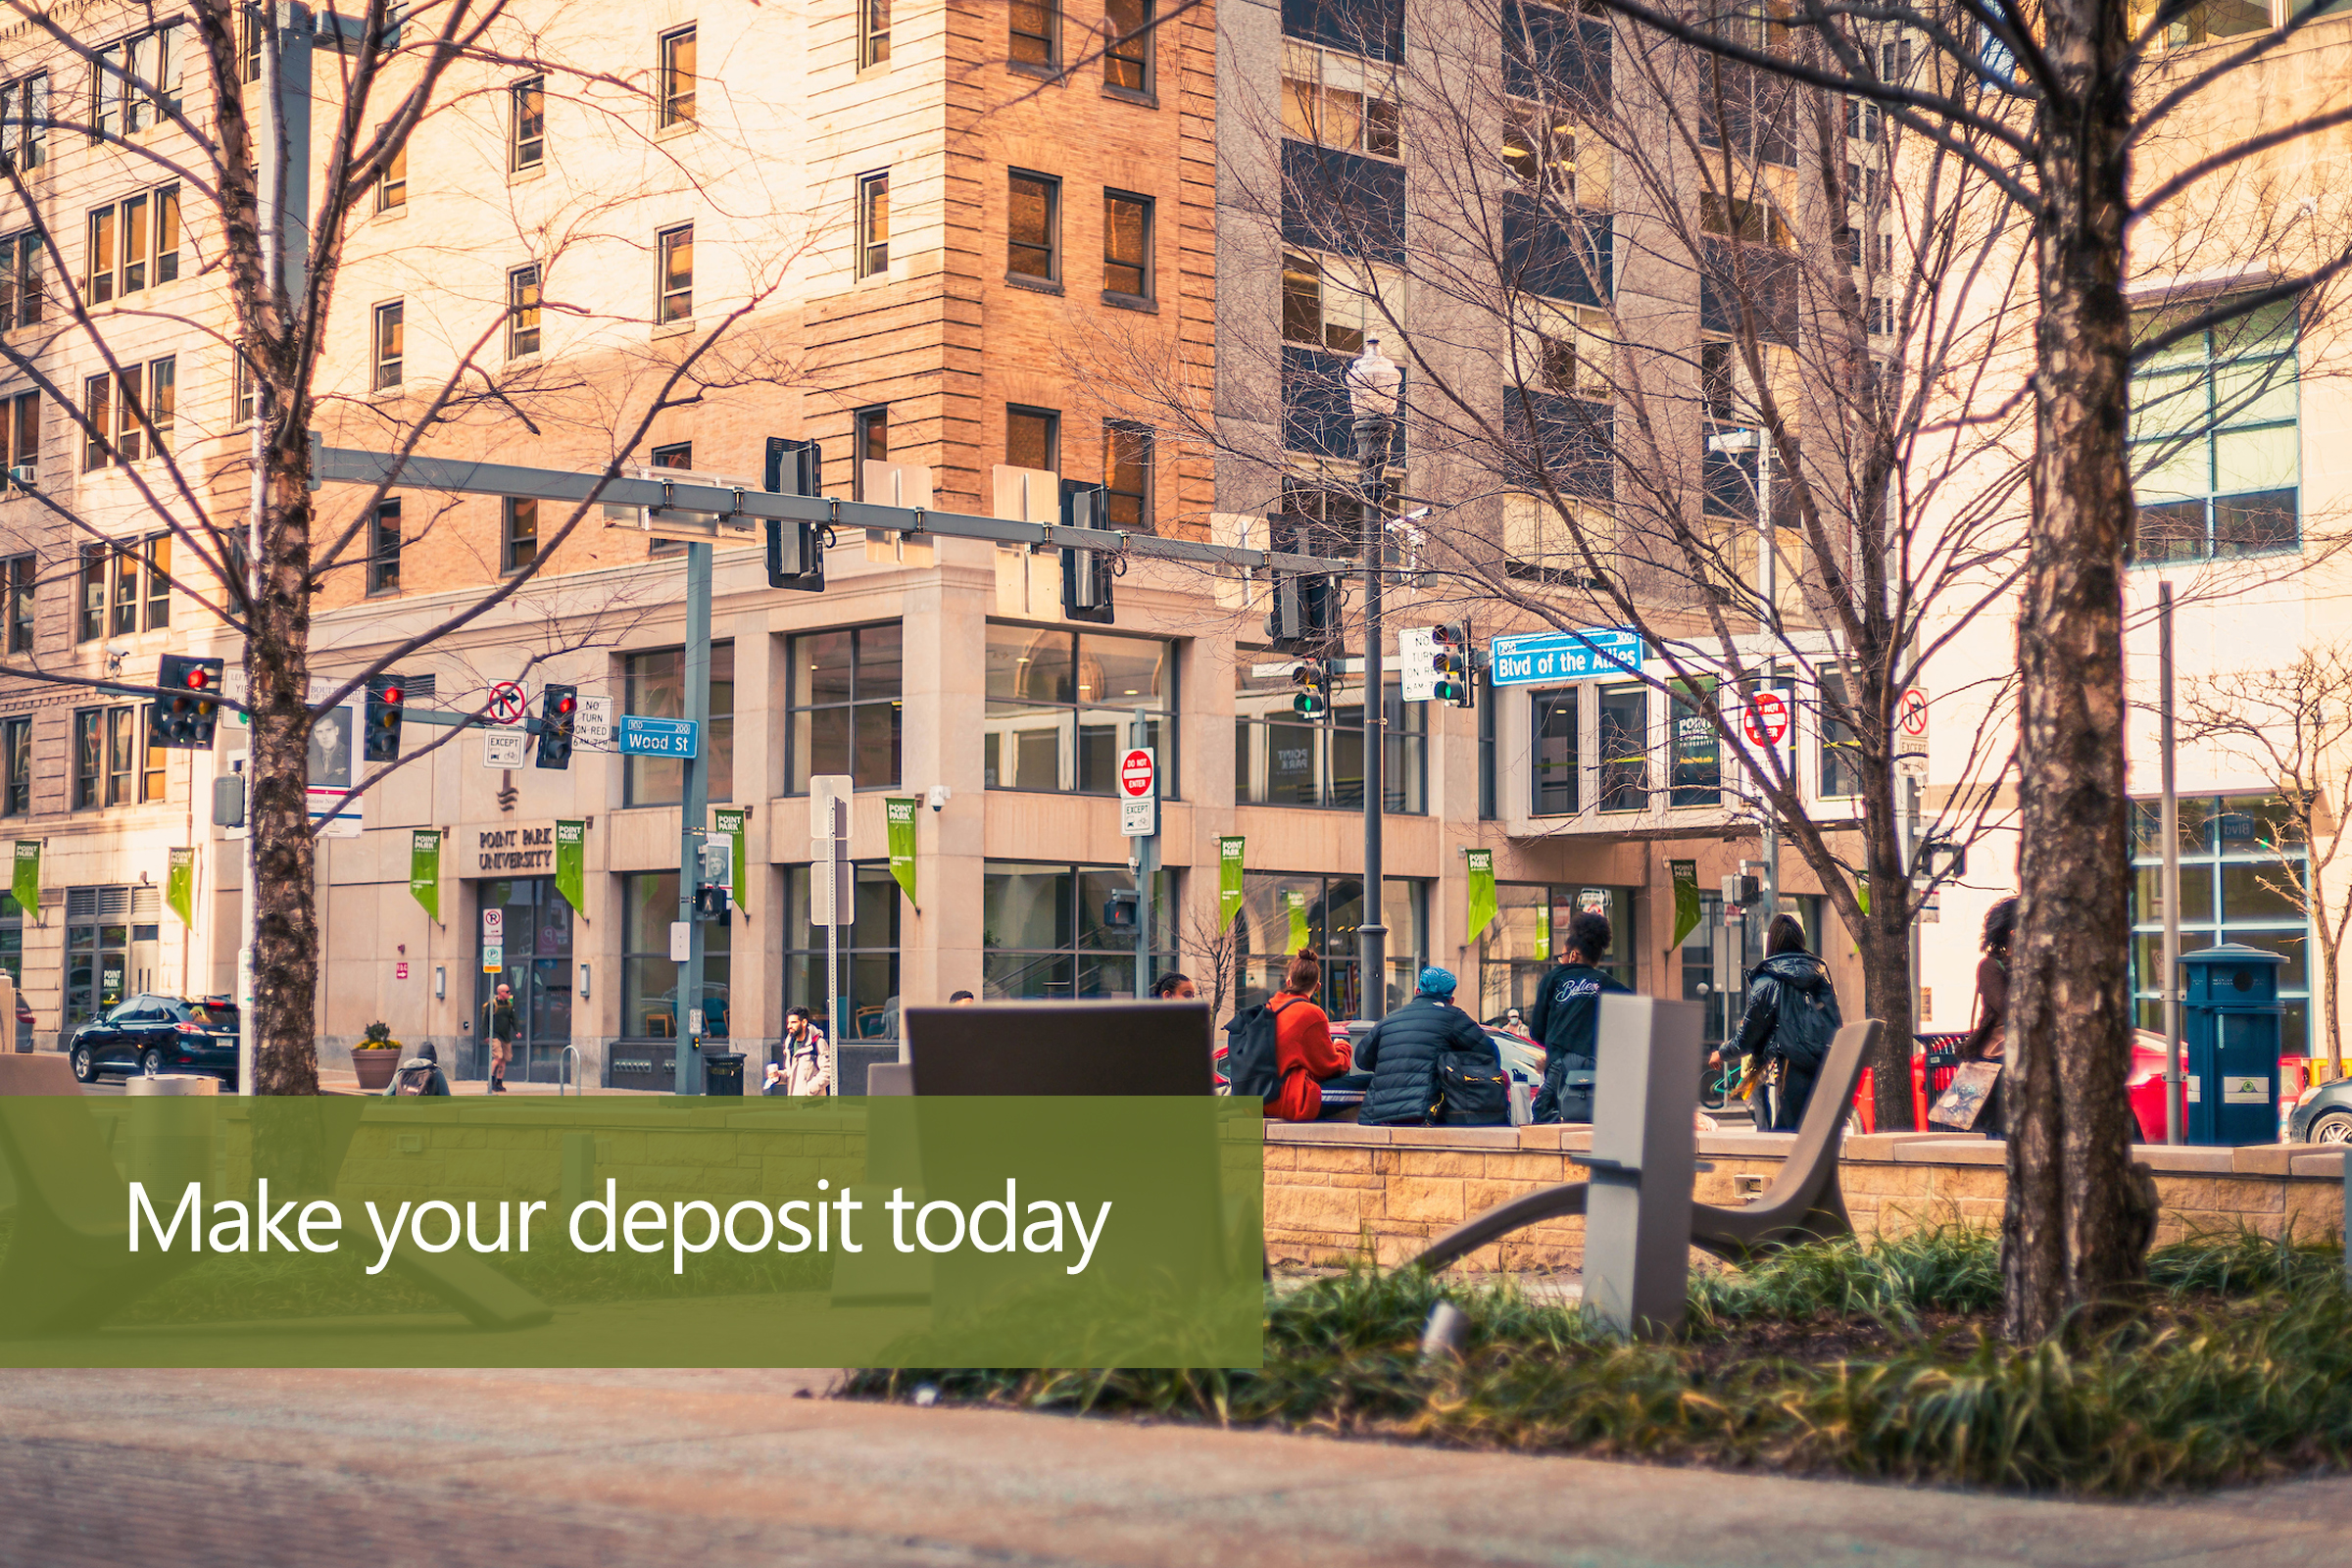 Photo of students walking through Village Park with a caption that reads "Make your deposit today"